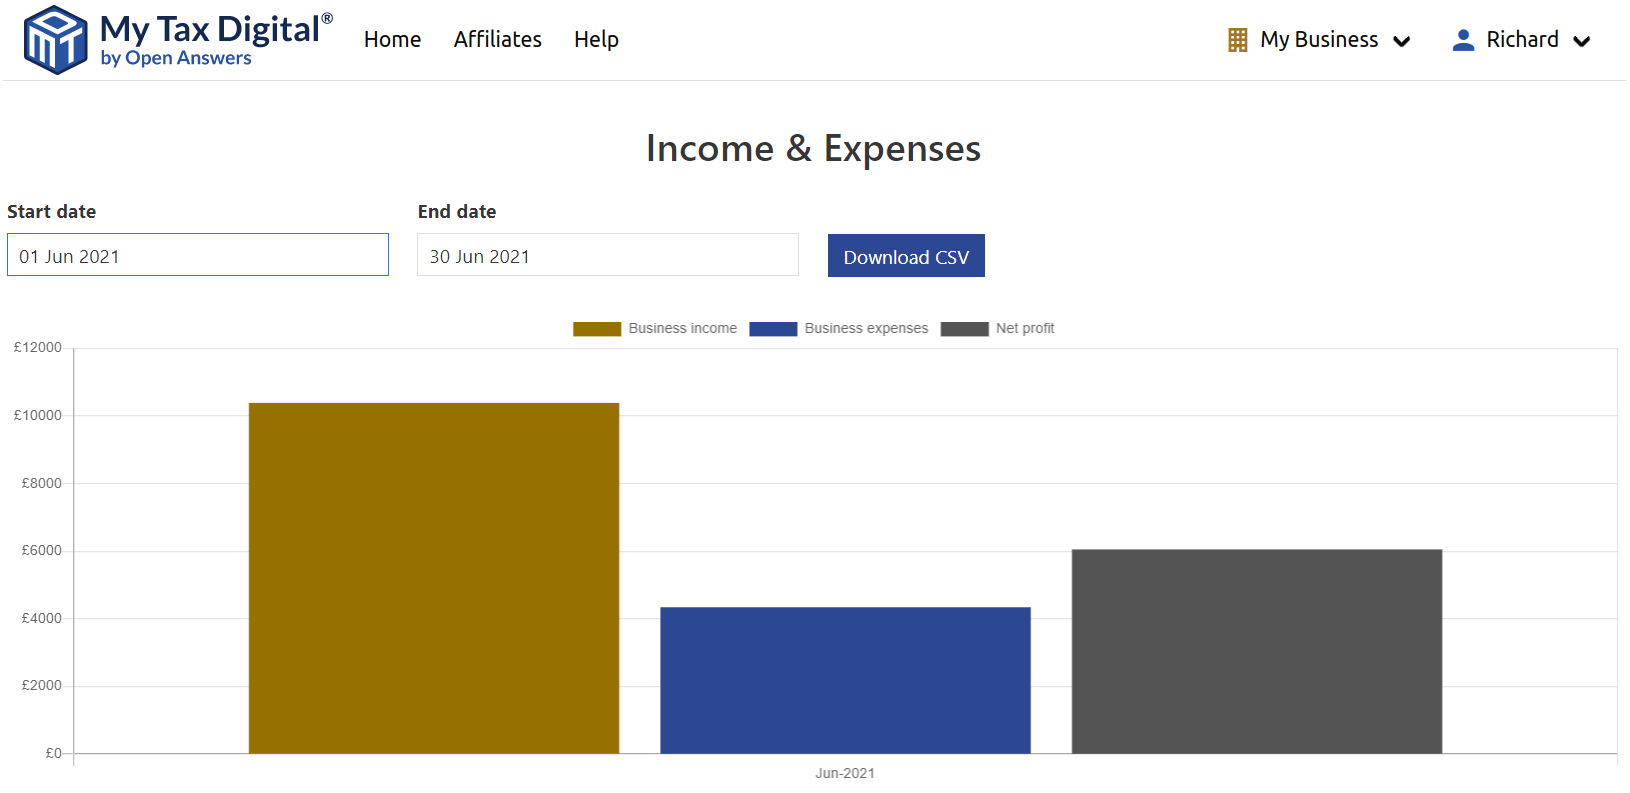 My Tax Digital Income & Expenses bar chart